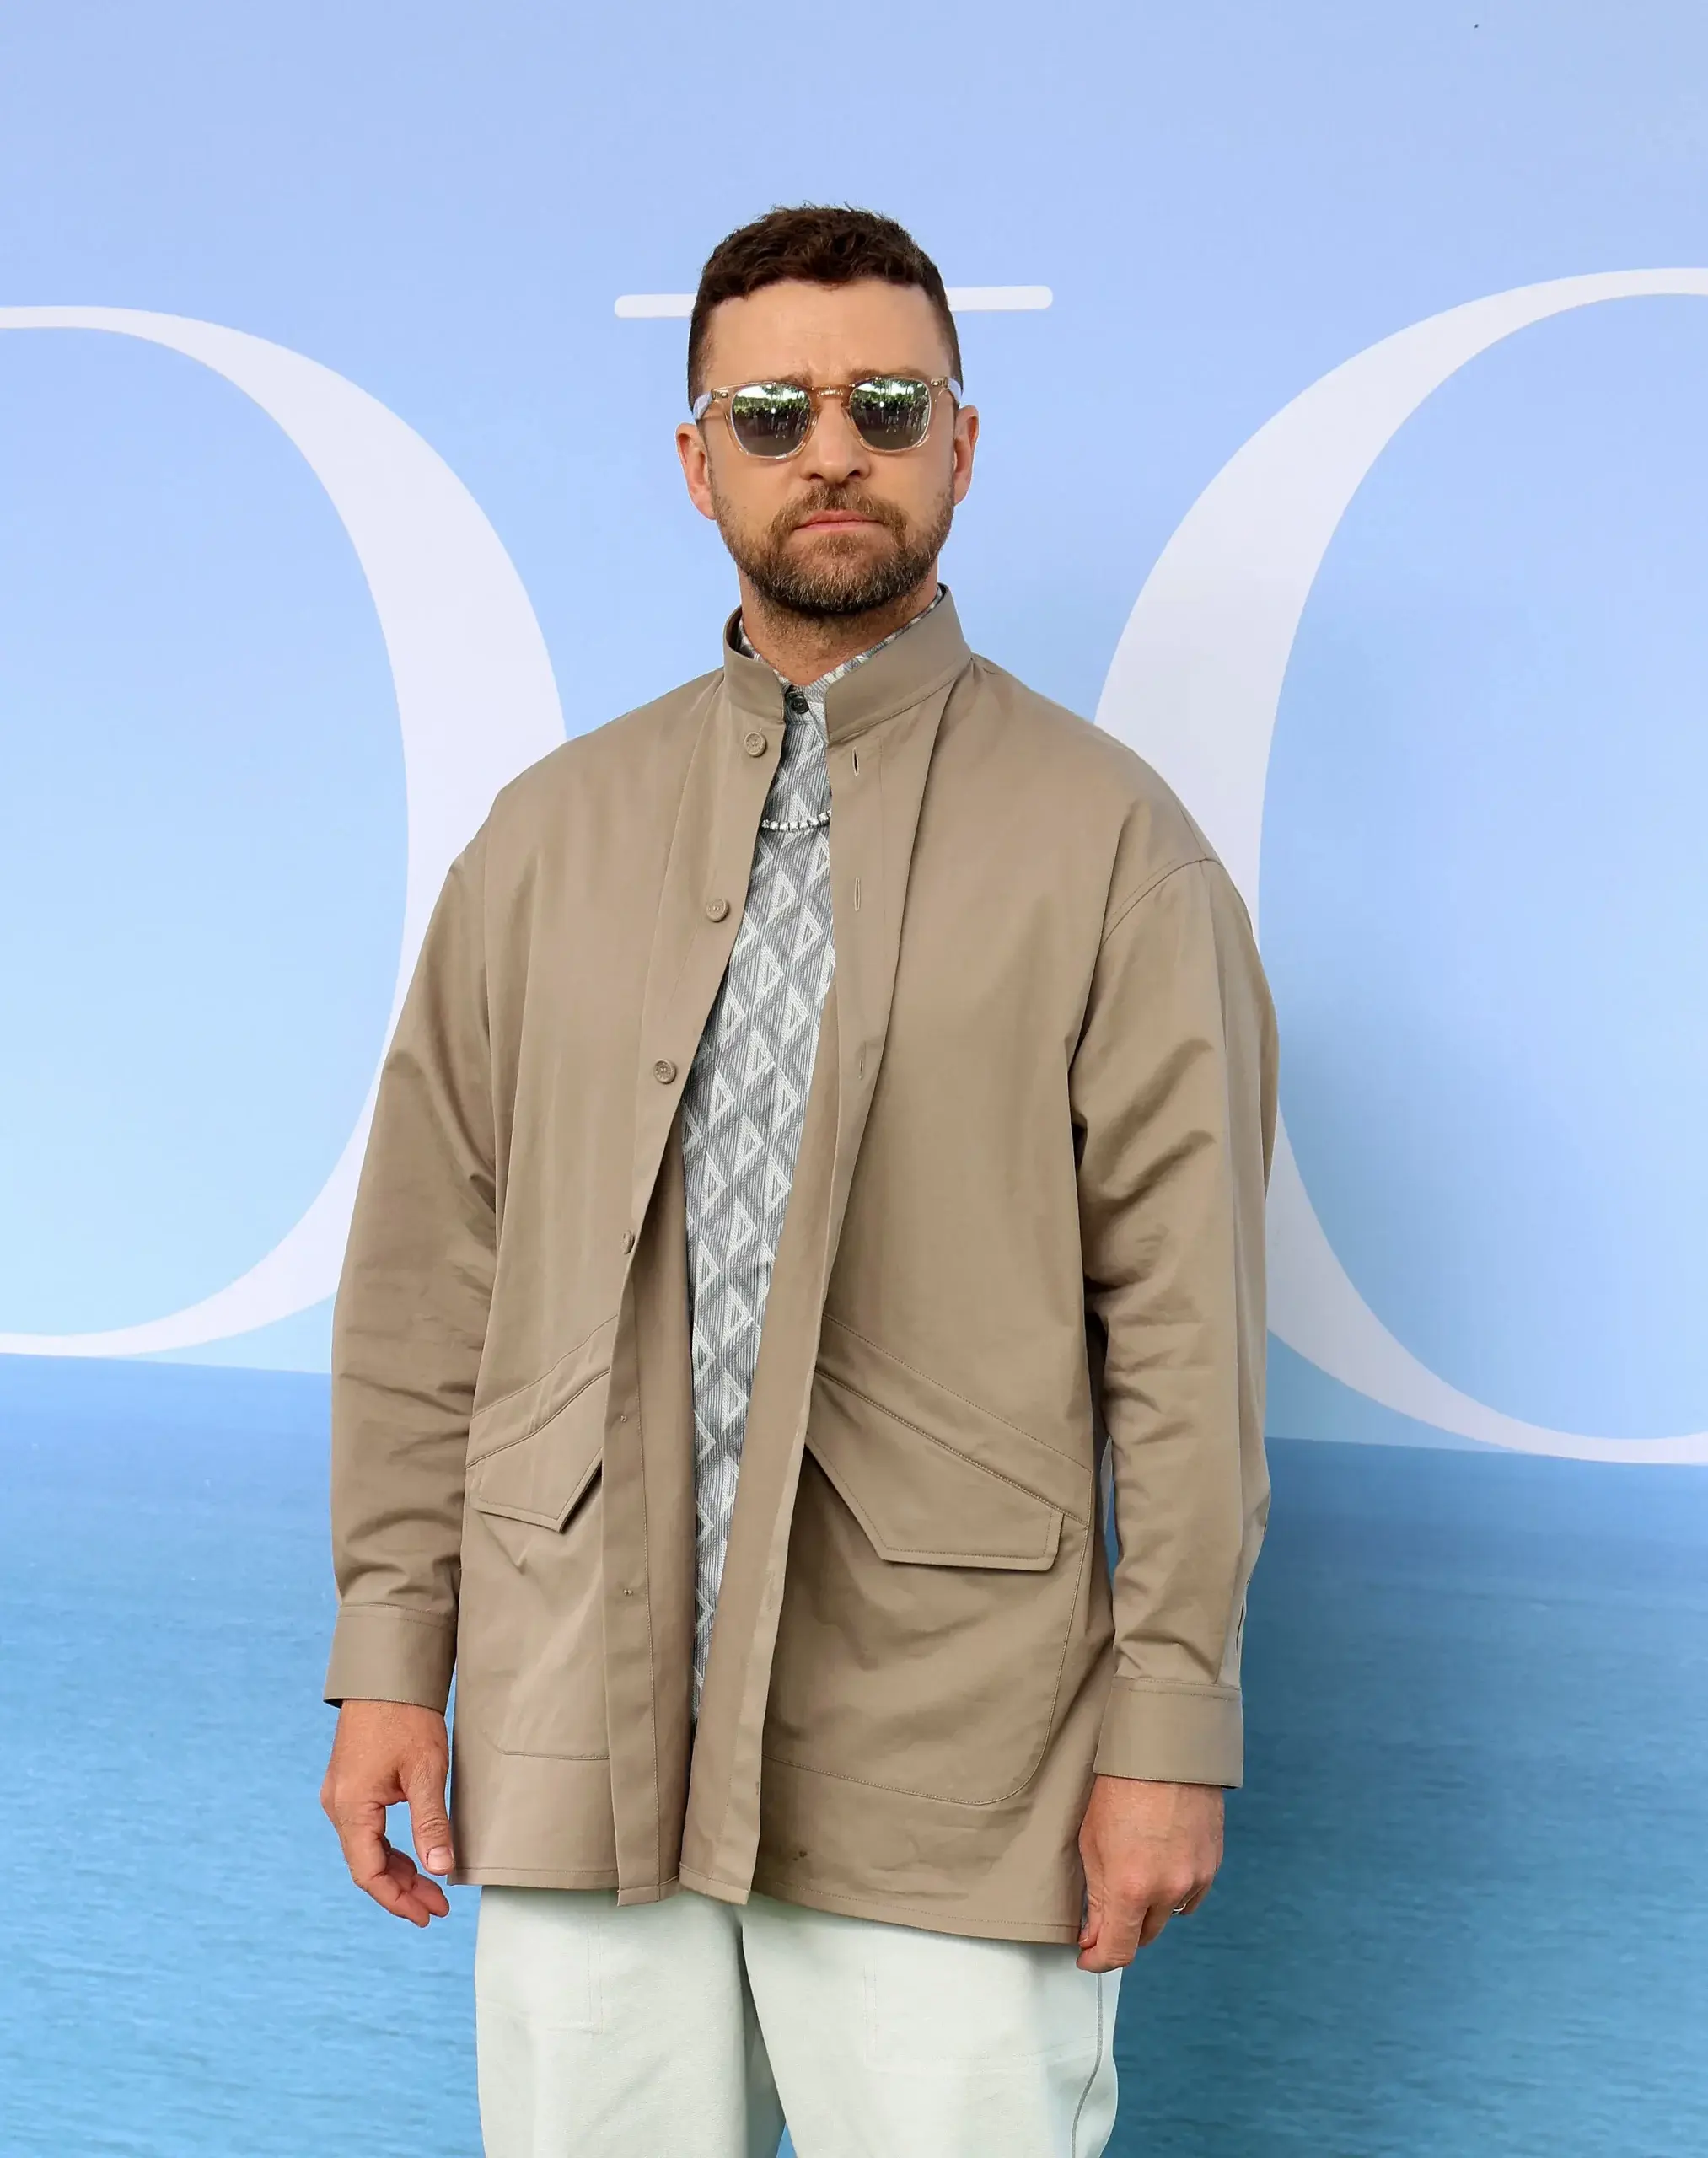 Justin Timberlake attending the Dior Menswear Spring Summer 2023 photocall